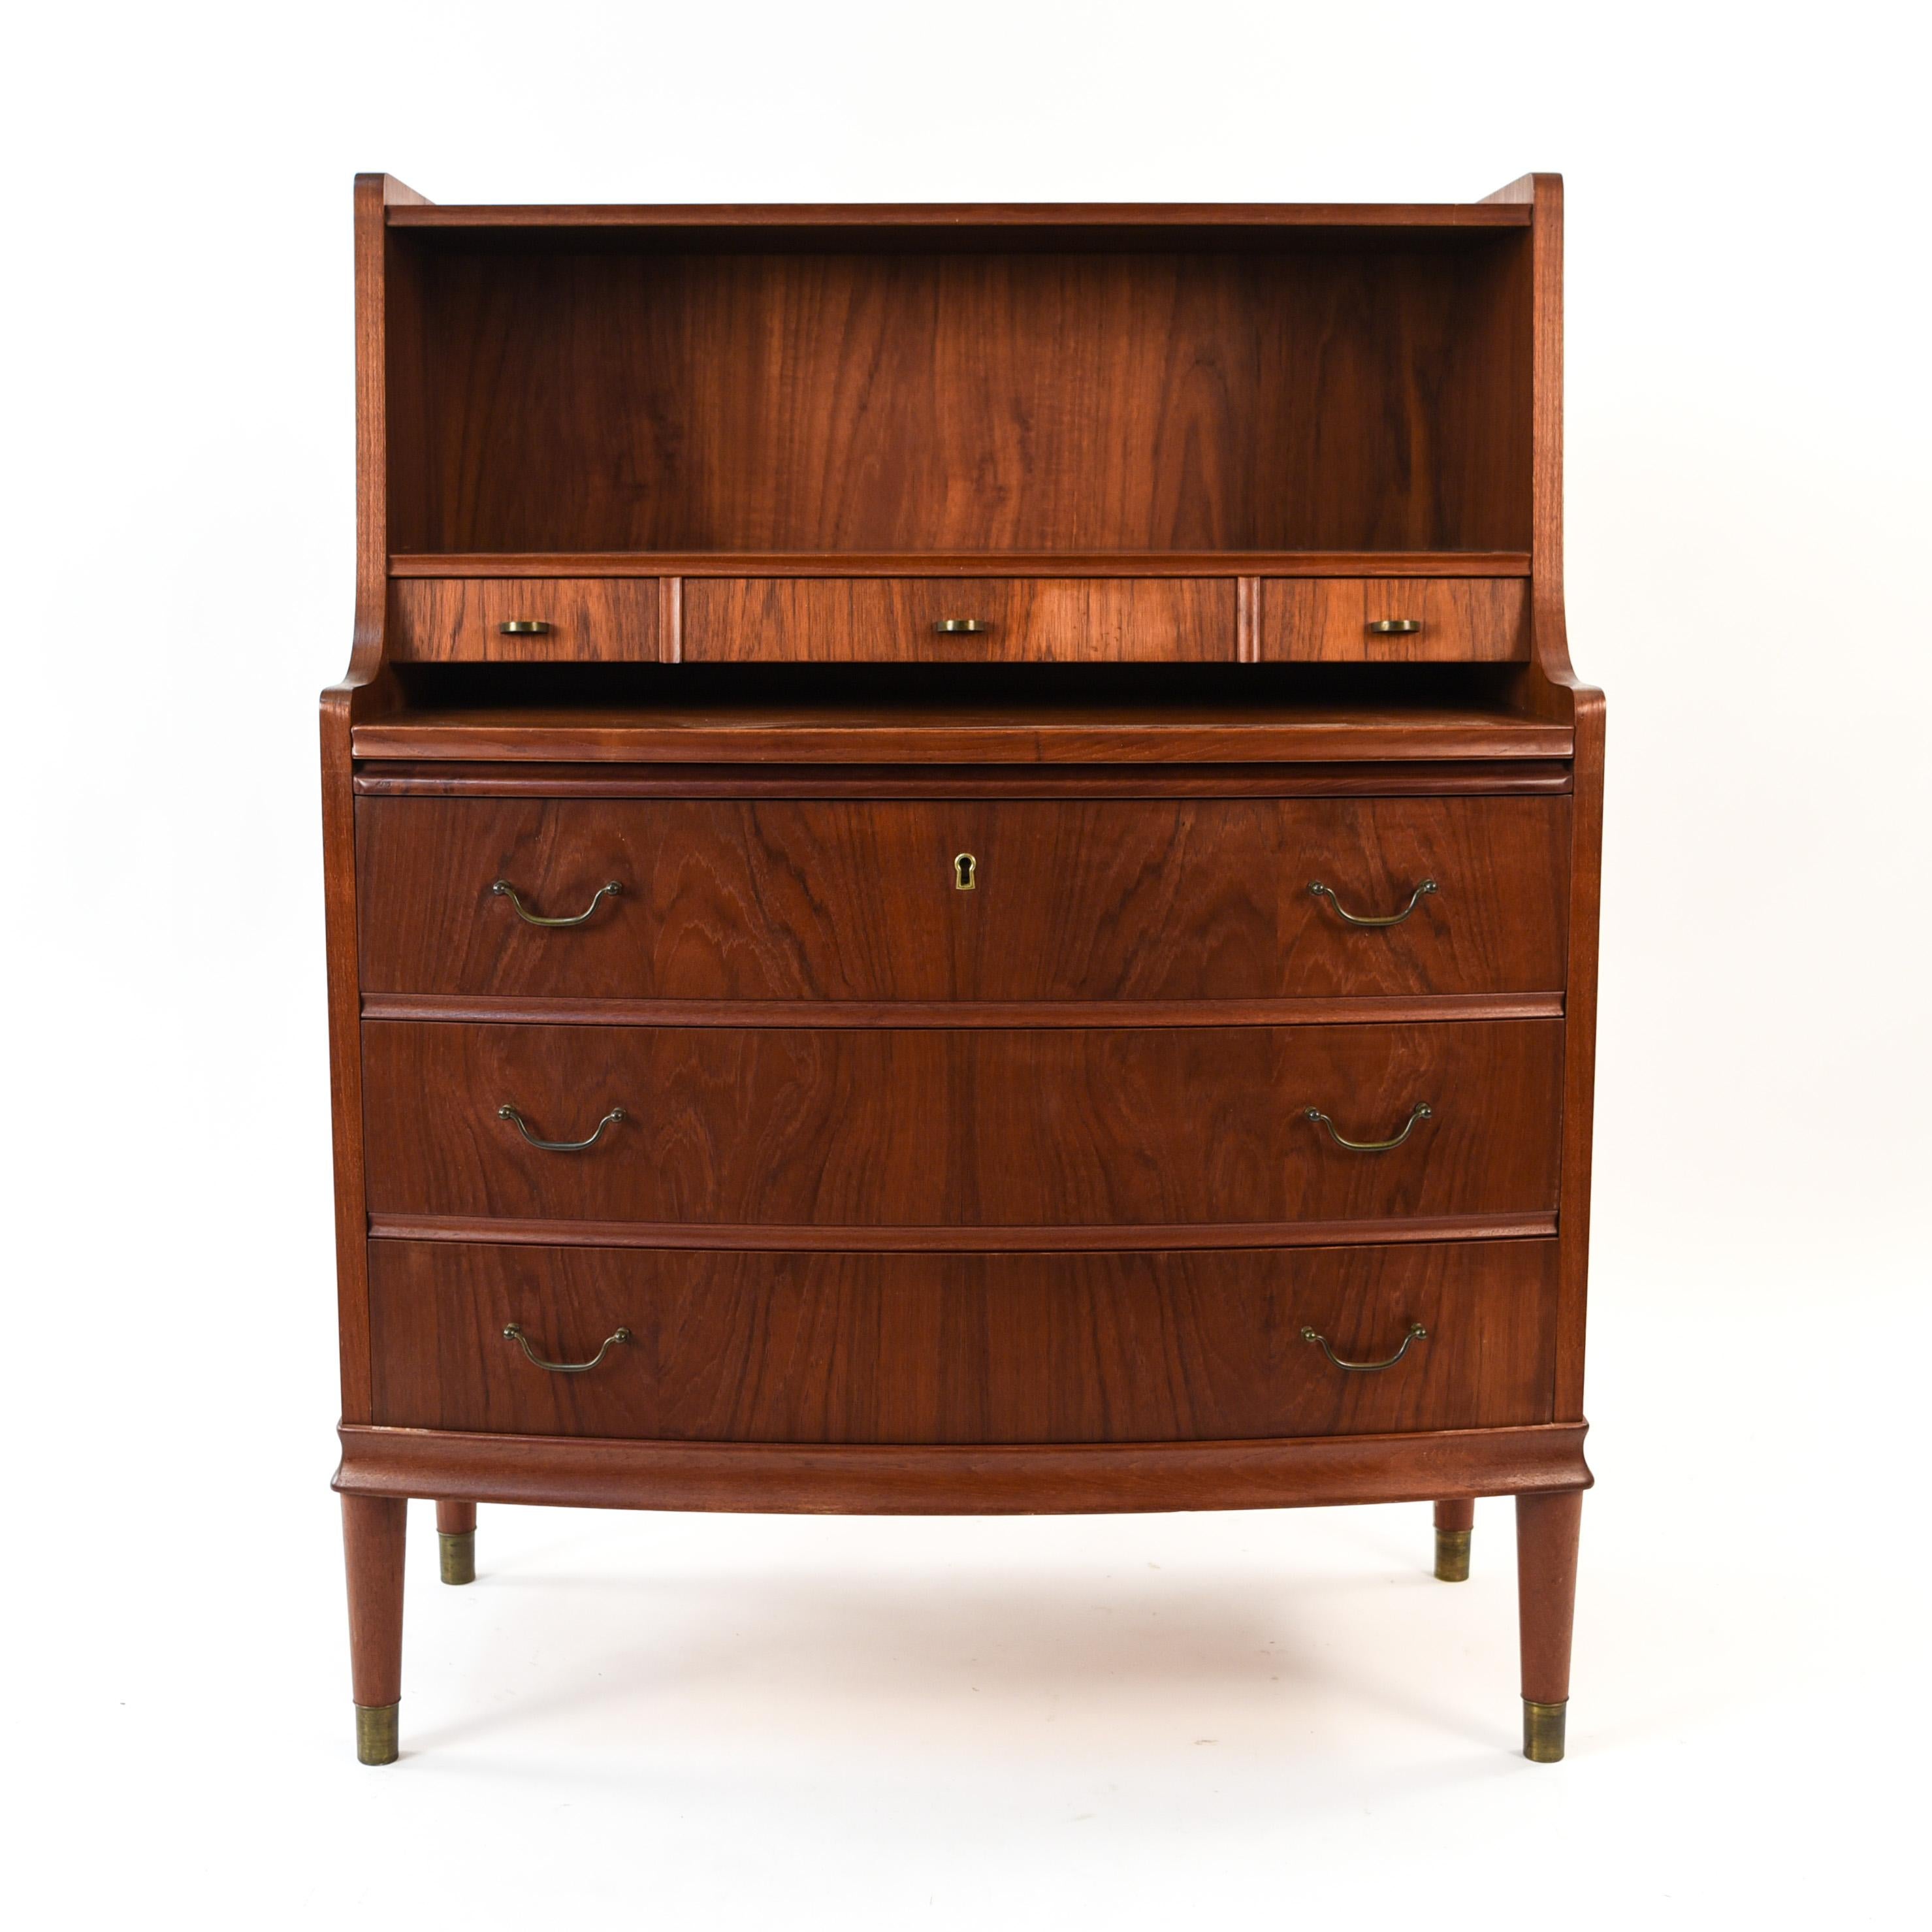 This Danish midcentury secretaire is made of teak wood, circa 1960s. This piece combines the traditional feel of the hardware and curved front with the Scandinavian Modern silhouette, making it a versatile piece that would fit right into virtually